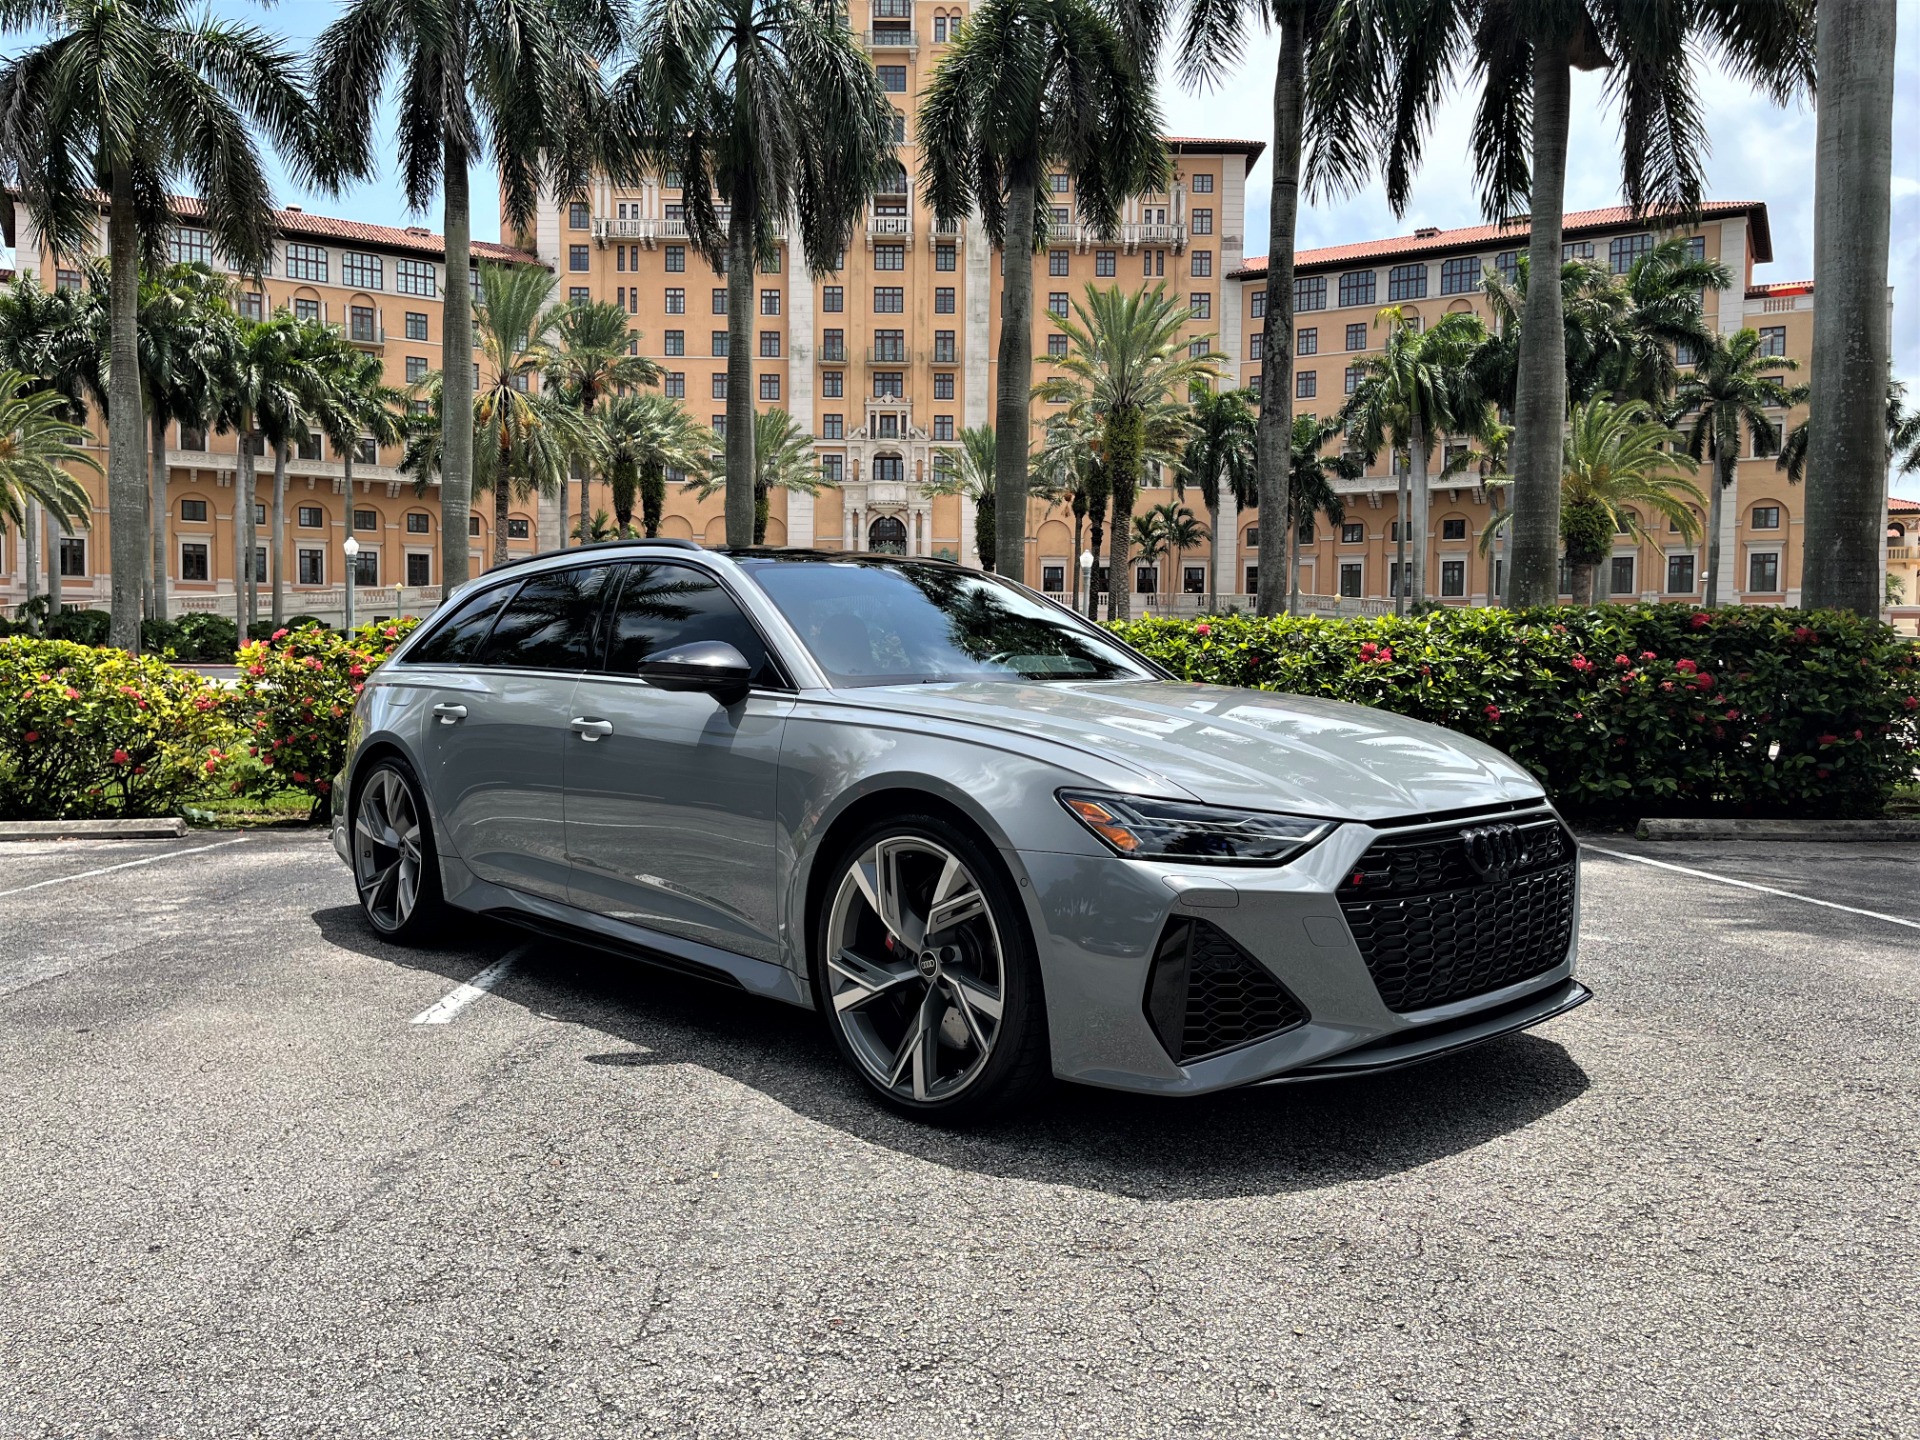 Used 2021 Audi RS 6 Avant 4.0T quattro Avant for sale Sold at The Gables Sports Cars in Miami FL 33146 1